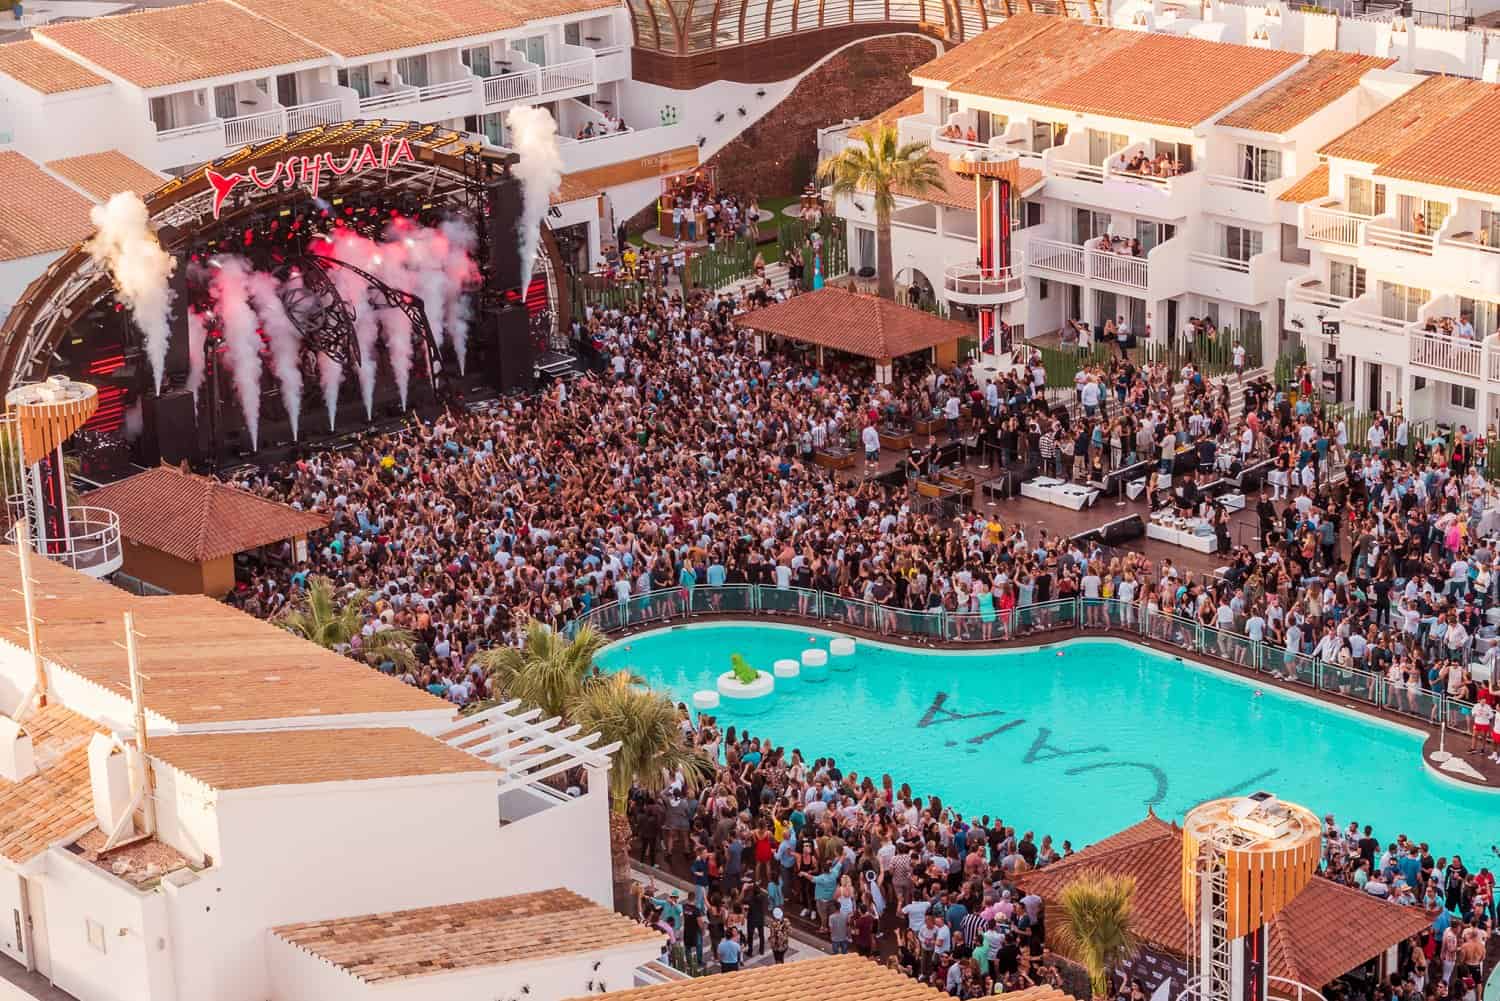 Ibiza 2022: What can we expect on the White Island this year?